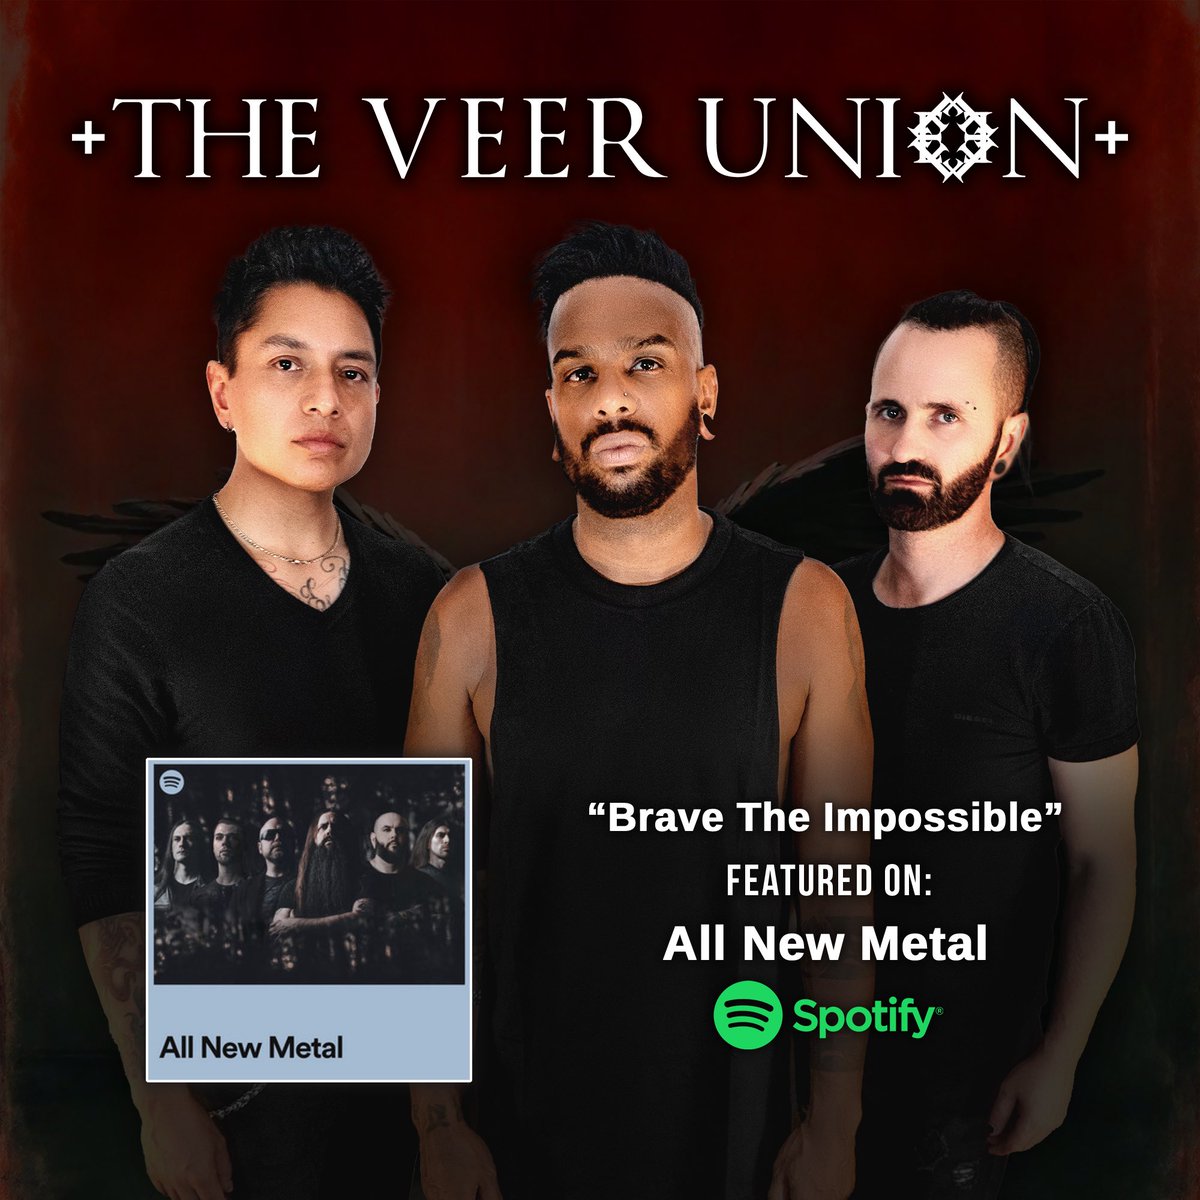 Huge thanks to @Spotify for adding “Brave The Impossible” to their Editorial Playlist, “All New Metal”! ADD this playlist to your music library! 🤘🏽🤘🏻🤘🏿 . . . #theveerunion #spotify #allnewmetal #bravetheimpossible #thankyou